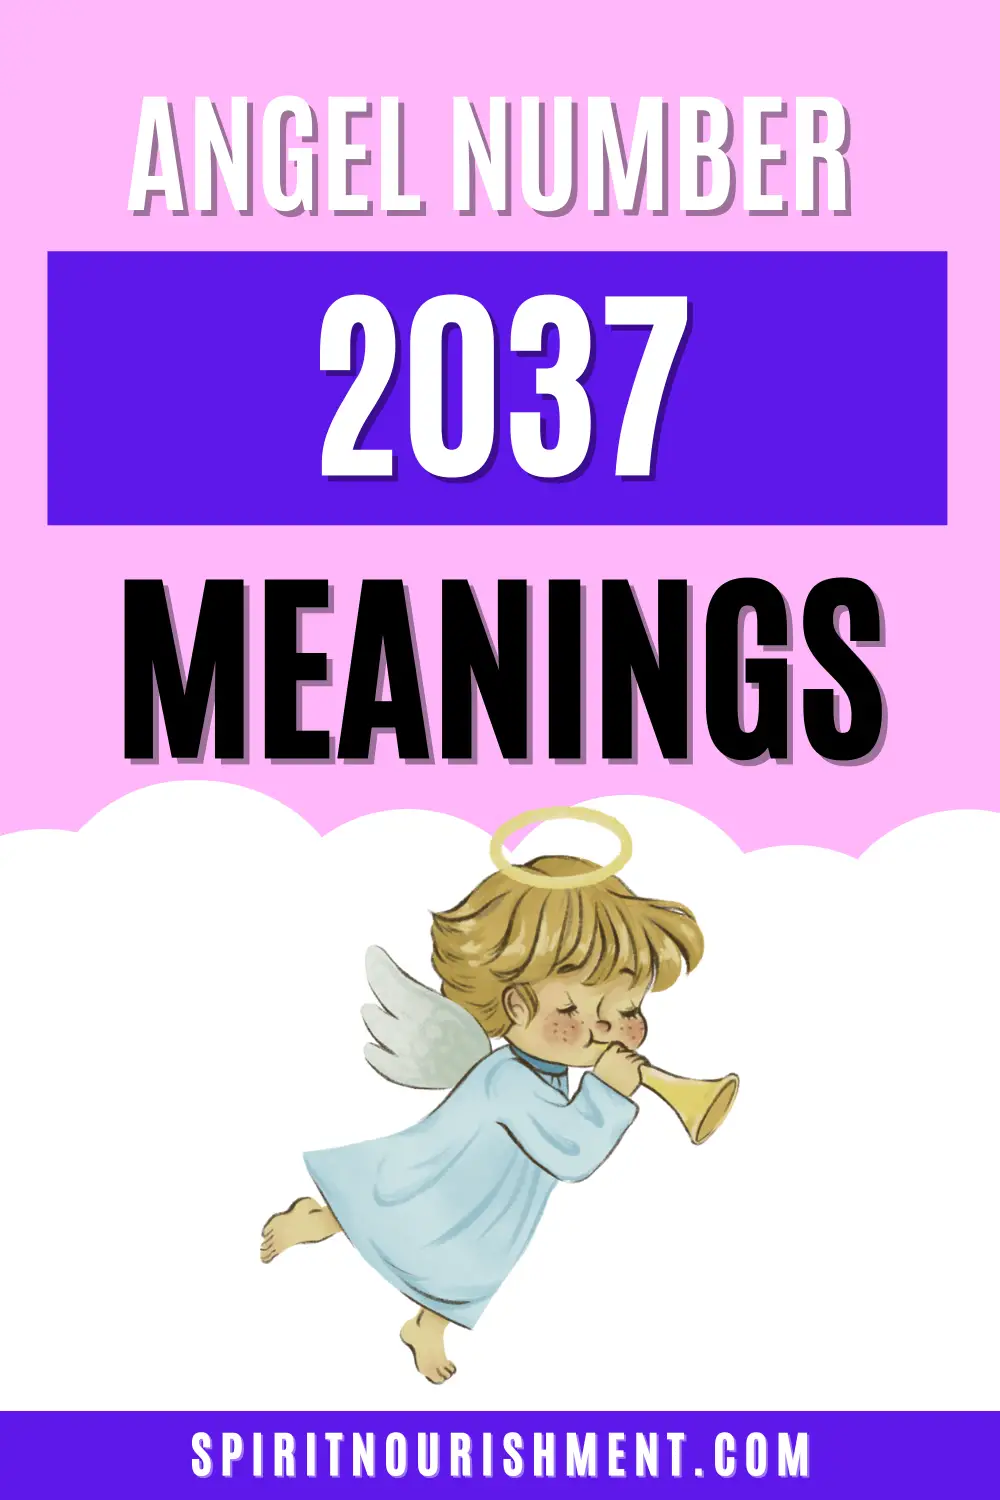 Angel Number 2037 Meaning Spiritual, Twin Flame, Love & Numerology